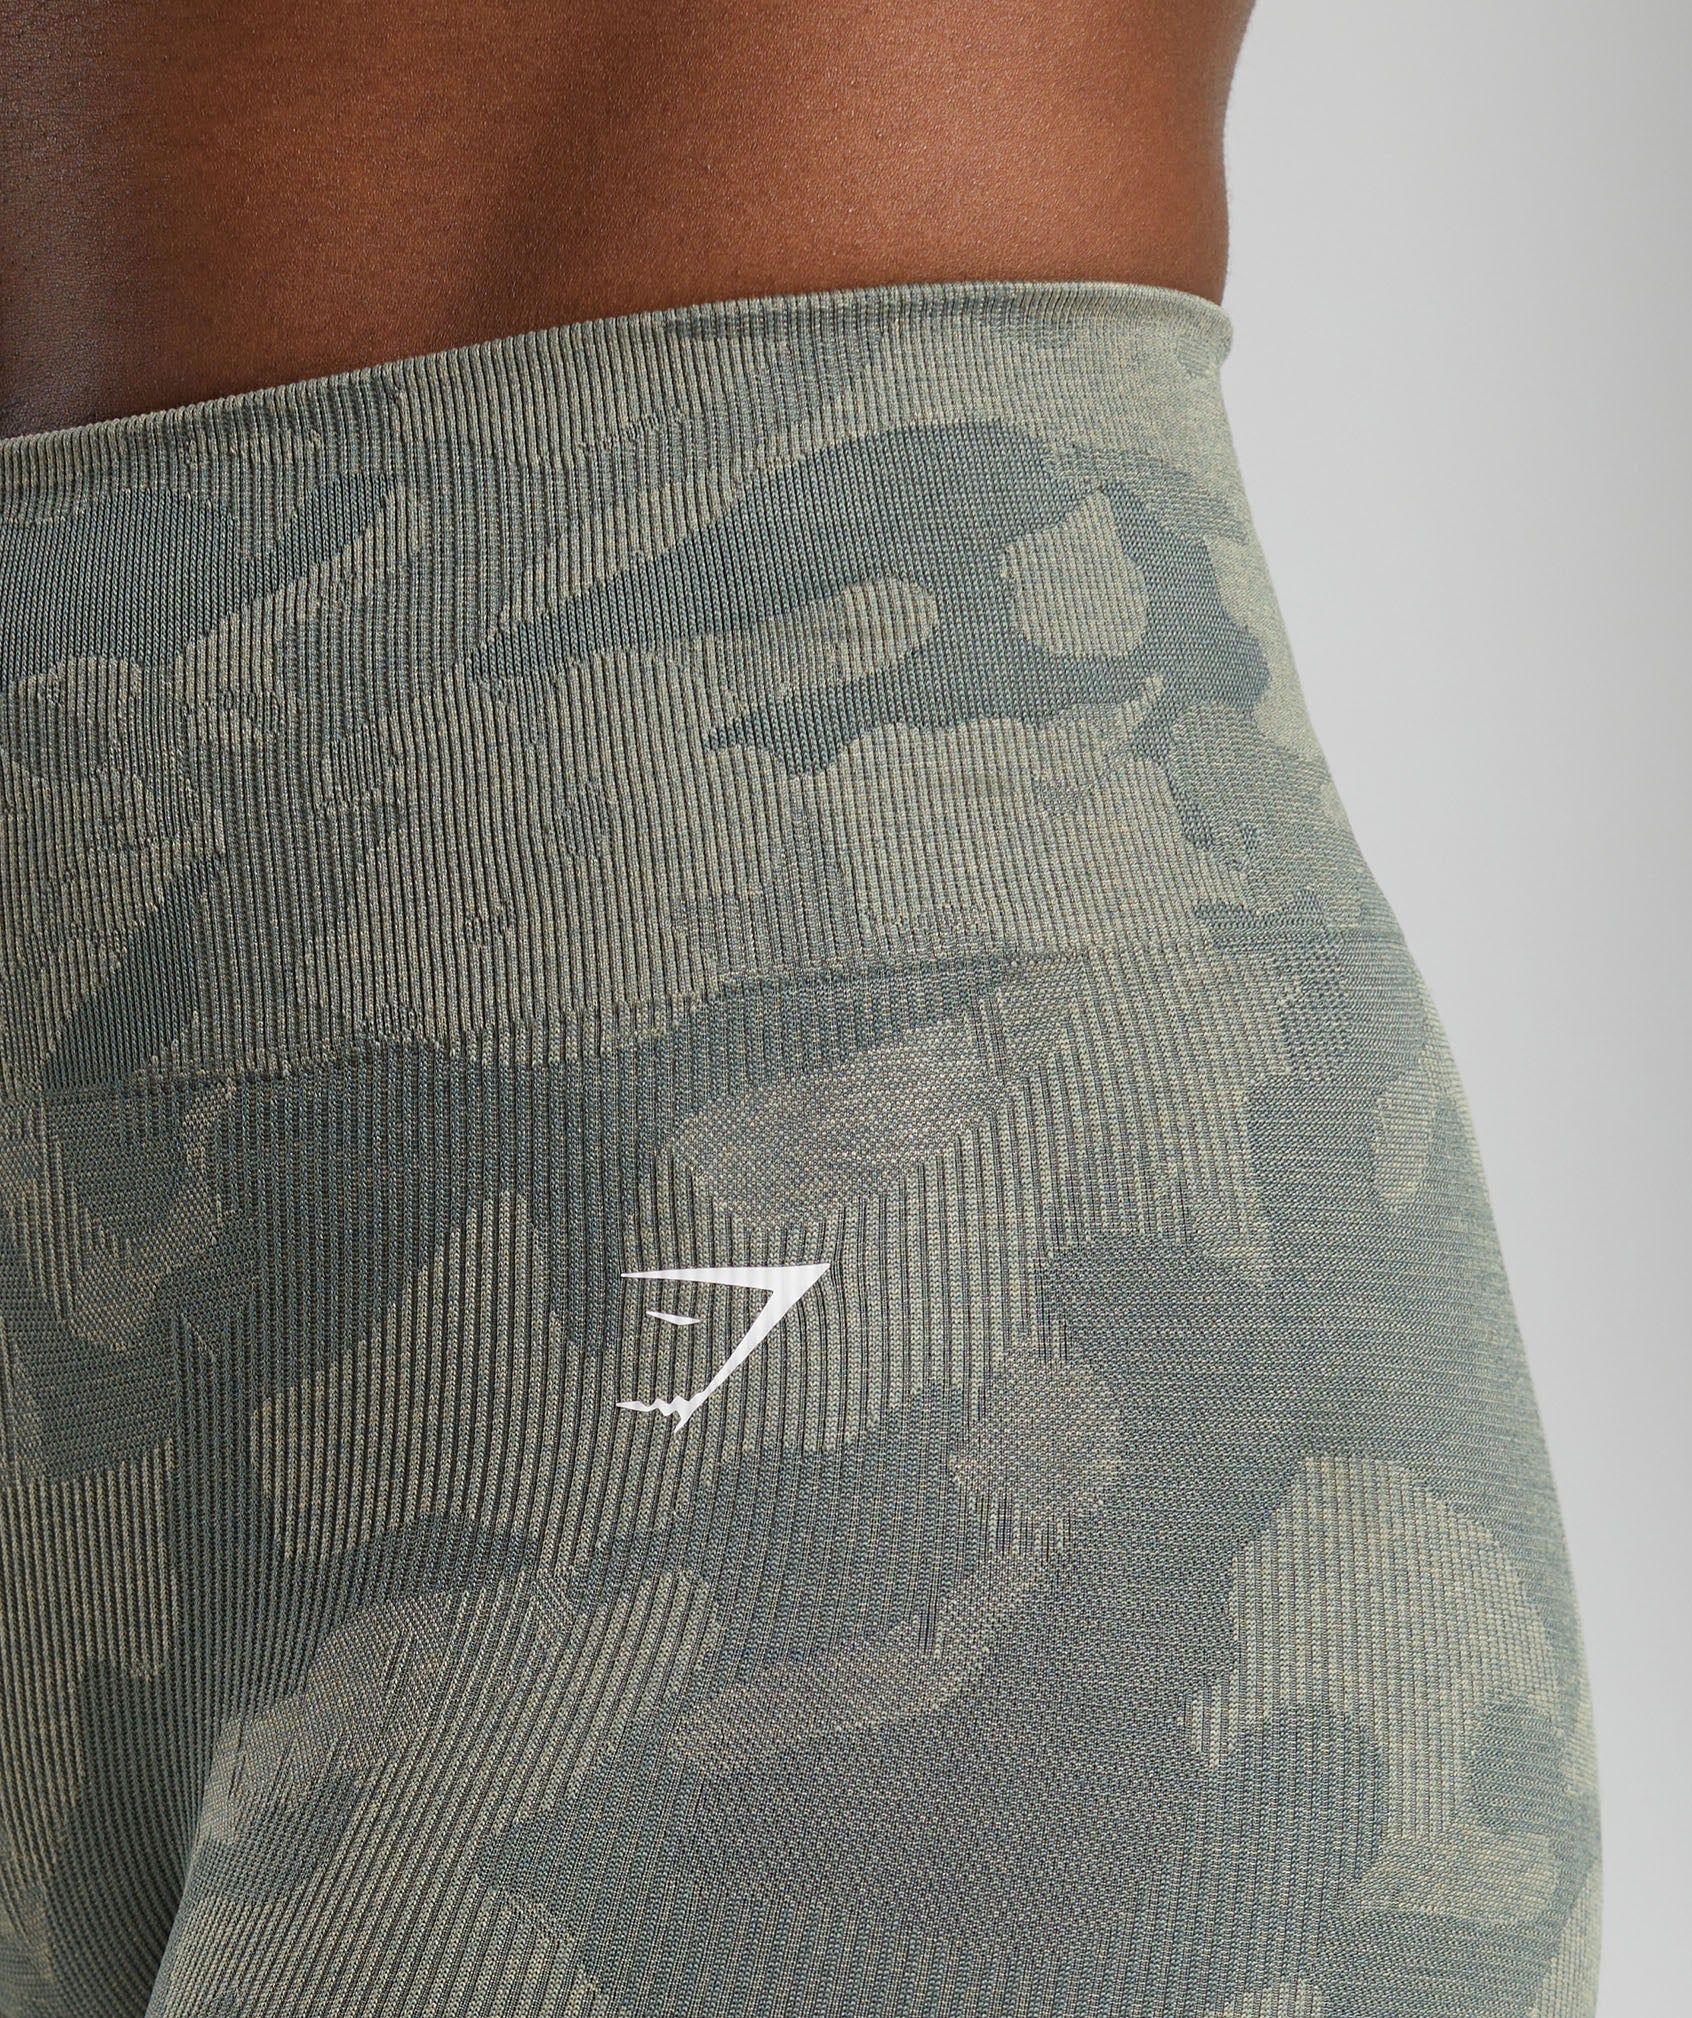 Adapt Camo Seamless Shorts in Unit Green/Chalk Green - view 6